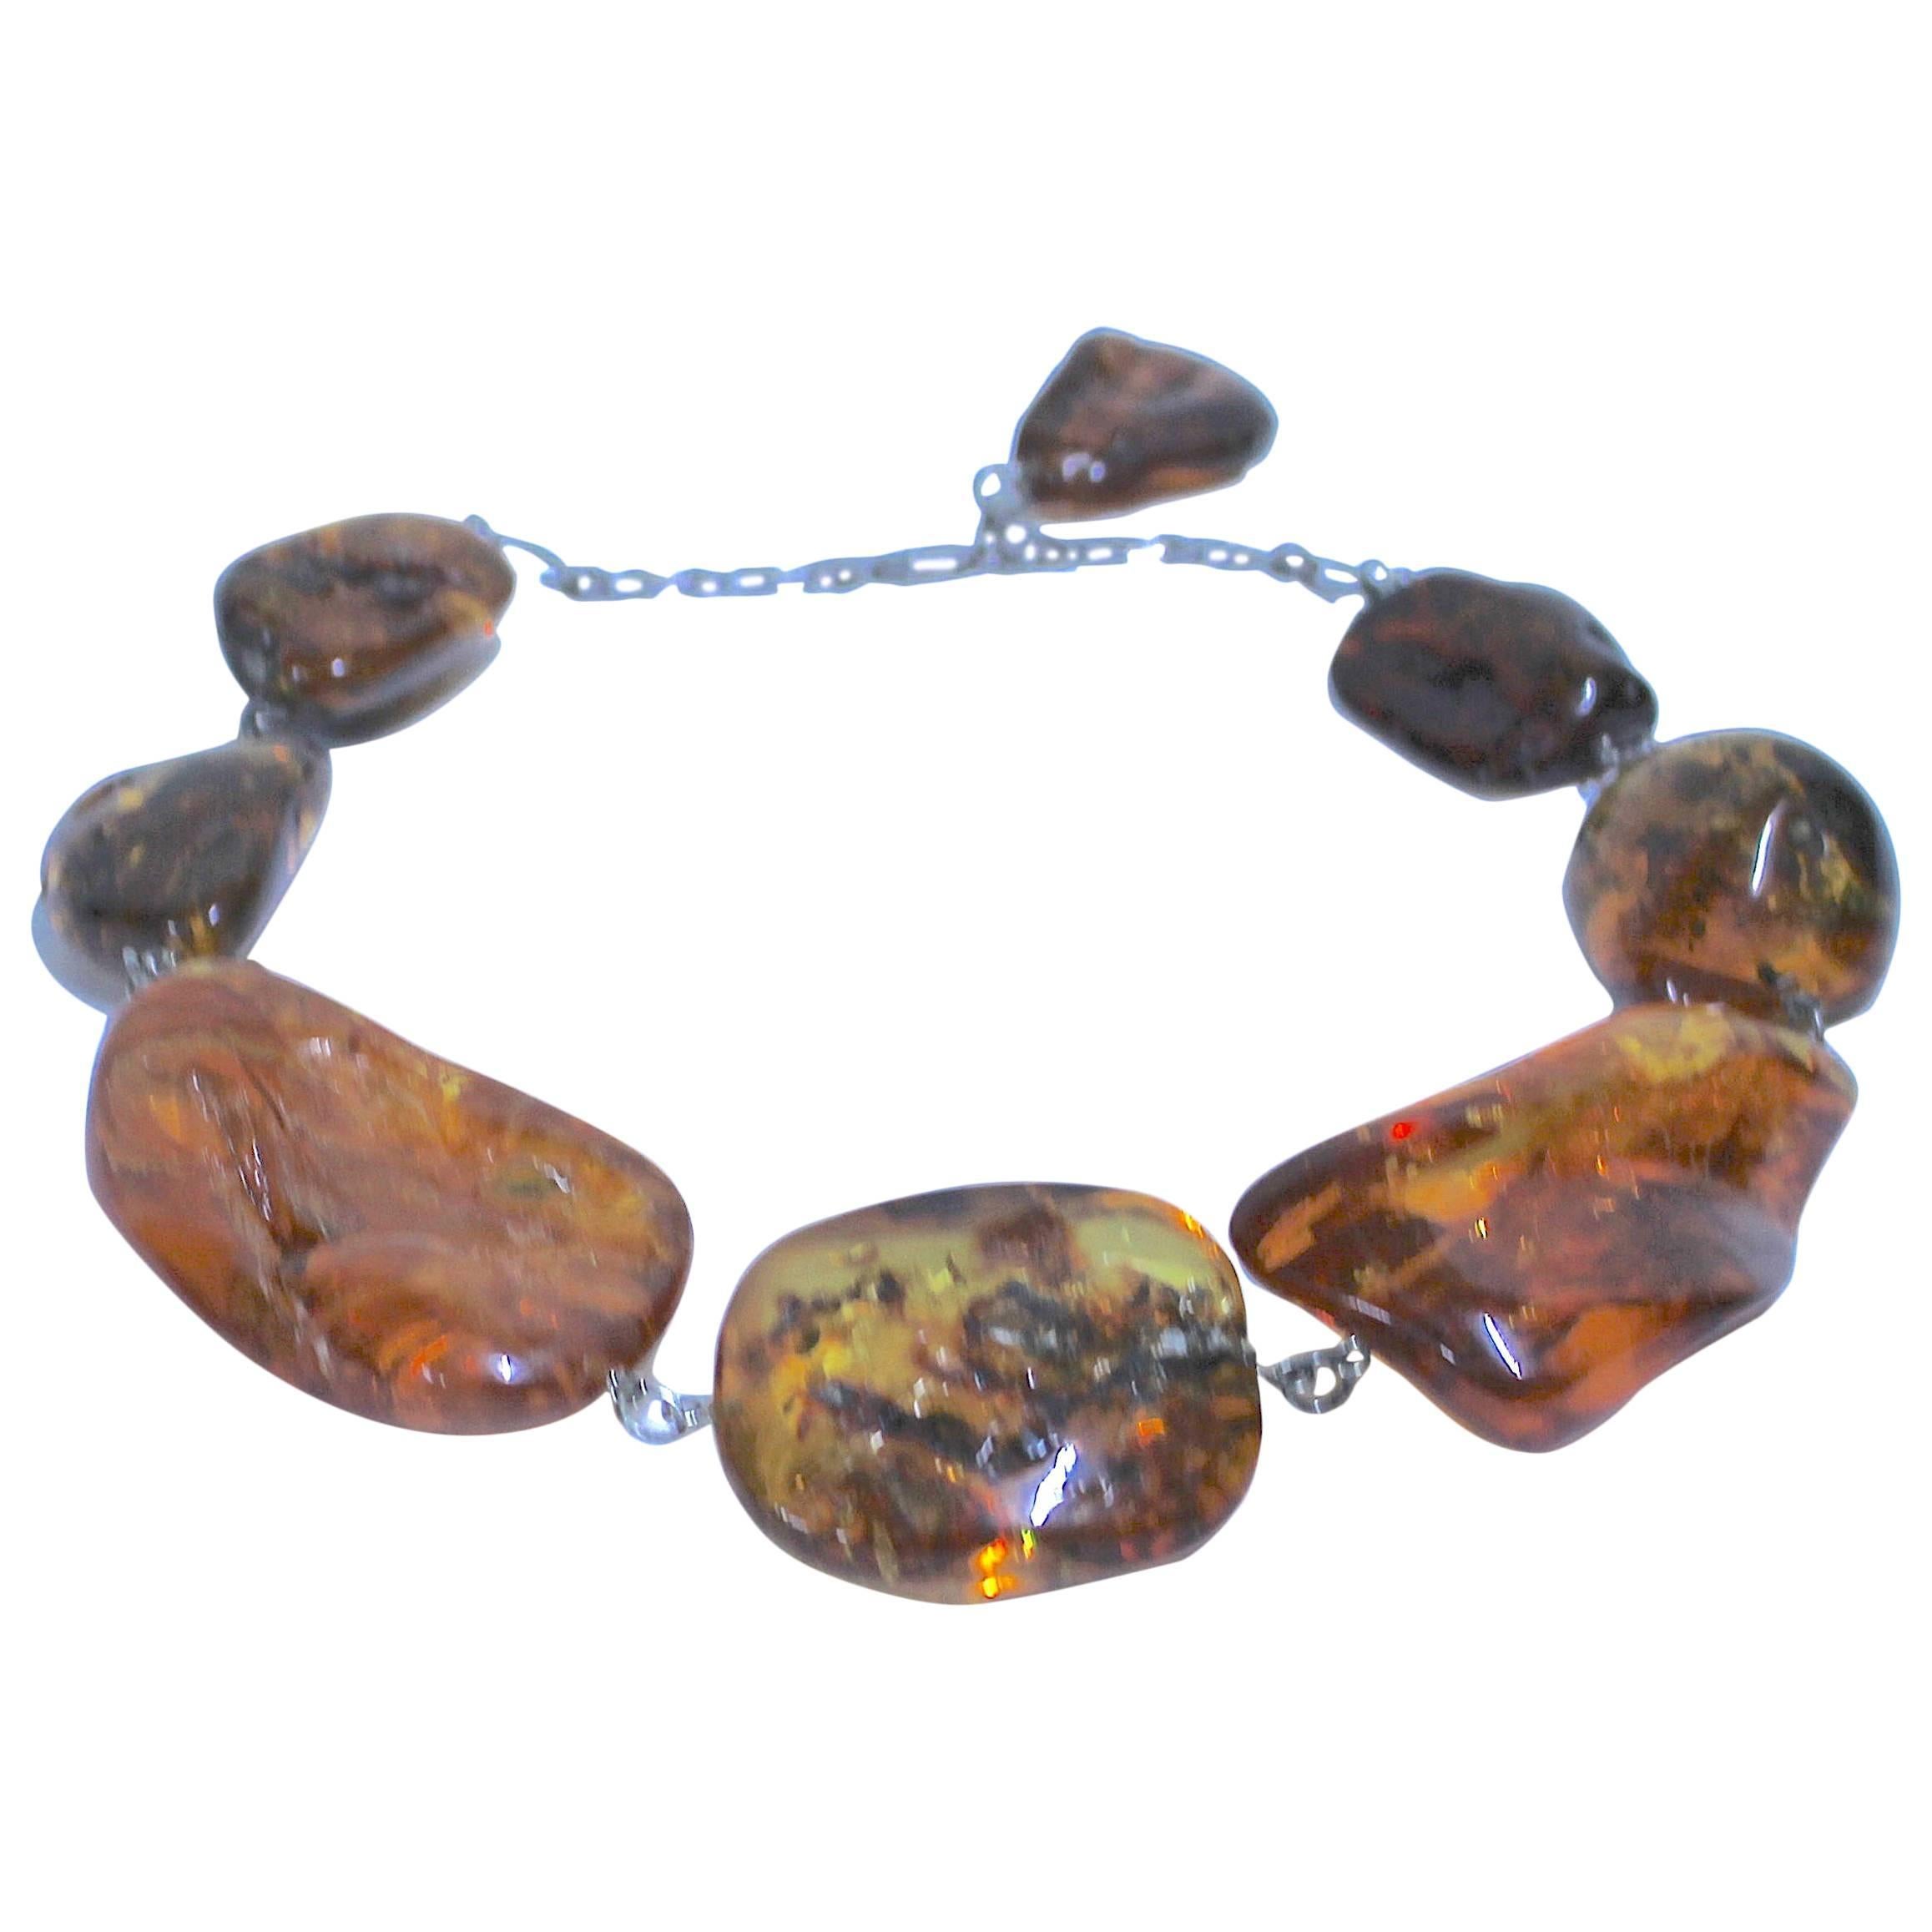 Special Massive Graduated Glowing Ancient Baltic Amber Necklace-Famed Provenance For Sale